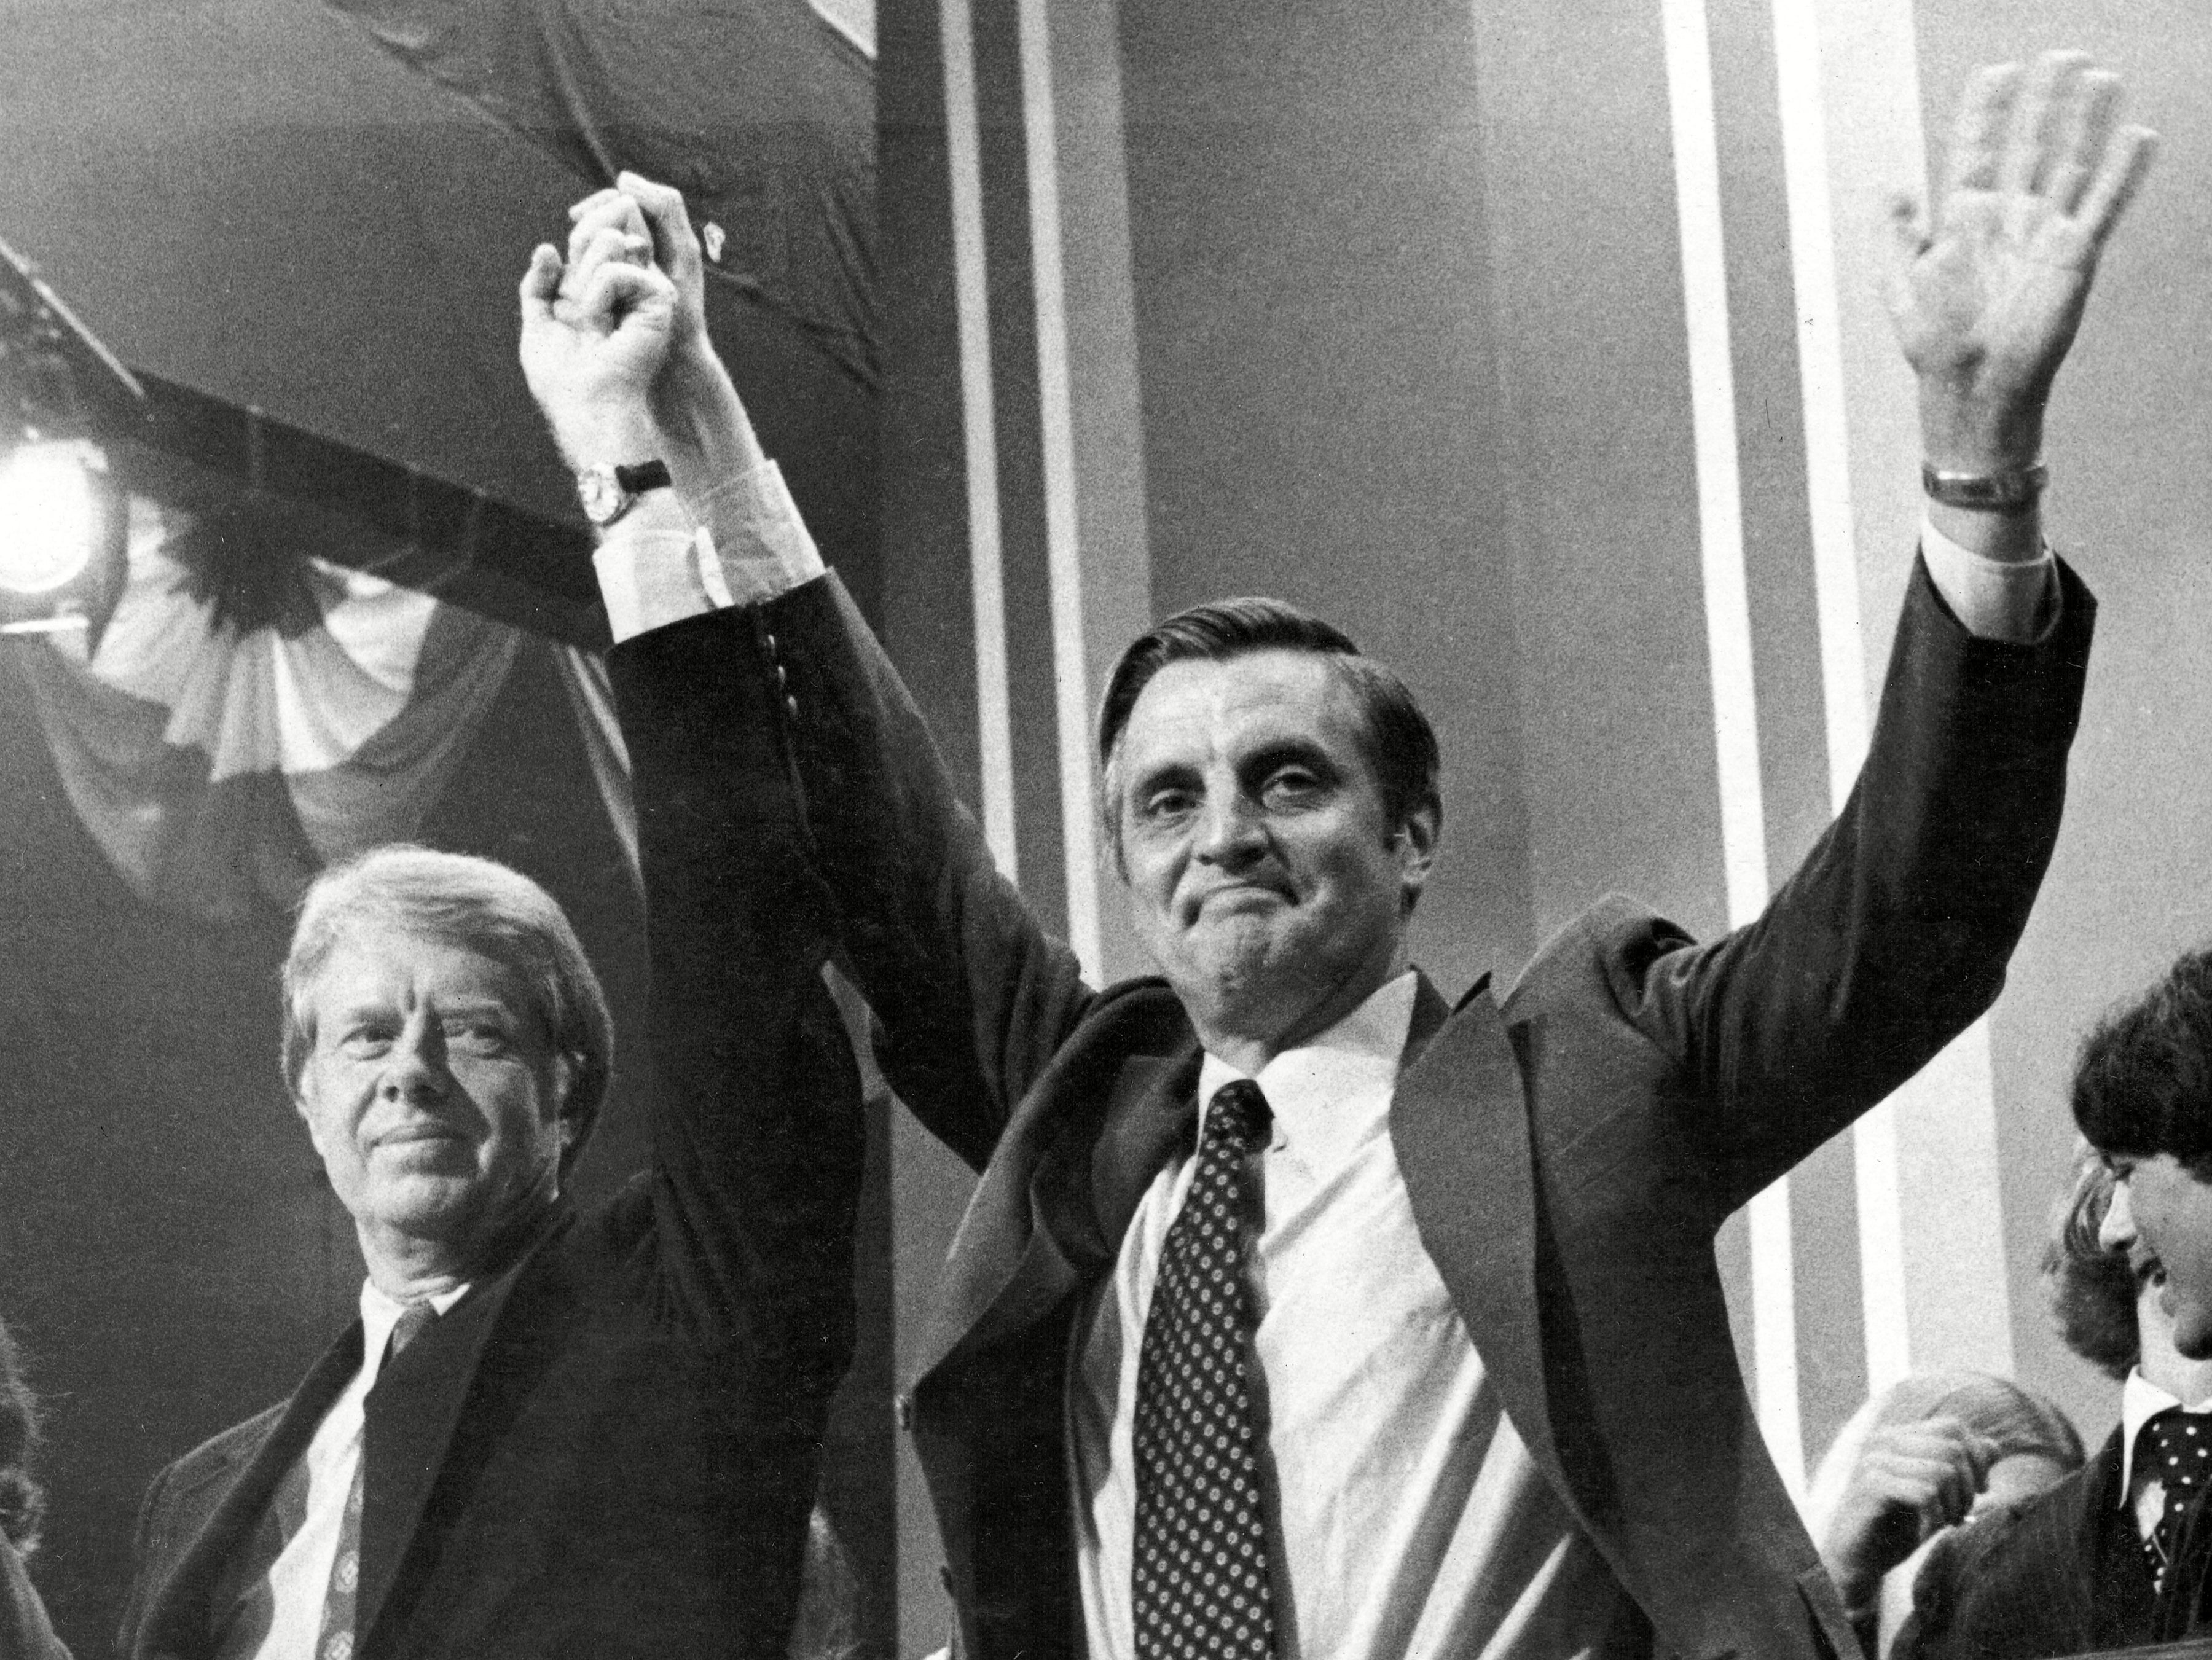 Mondale (right) with Jimmy Carter at the Democratic Convention in 1976